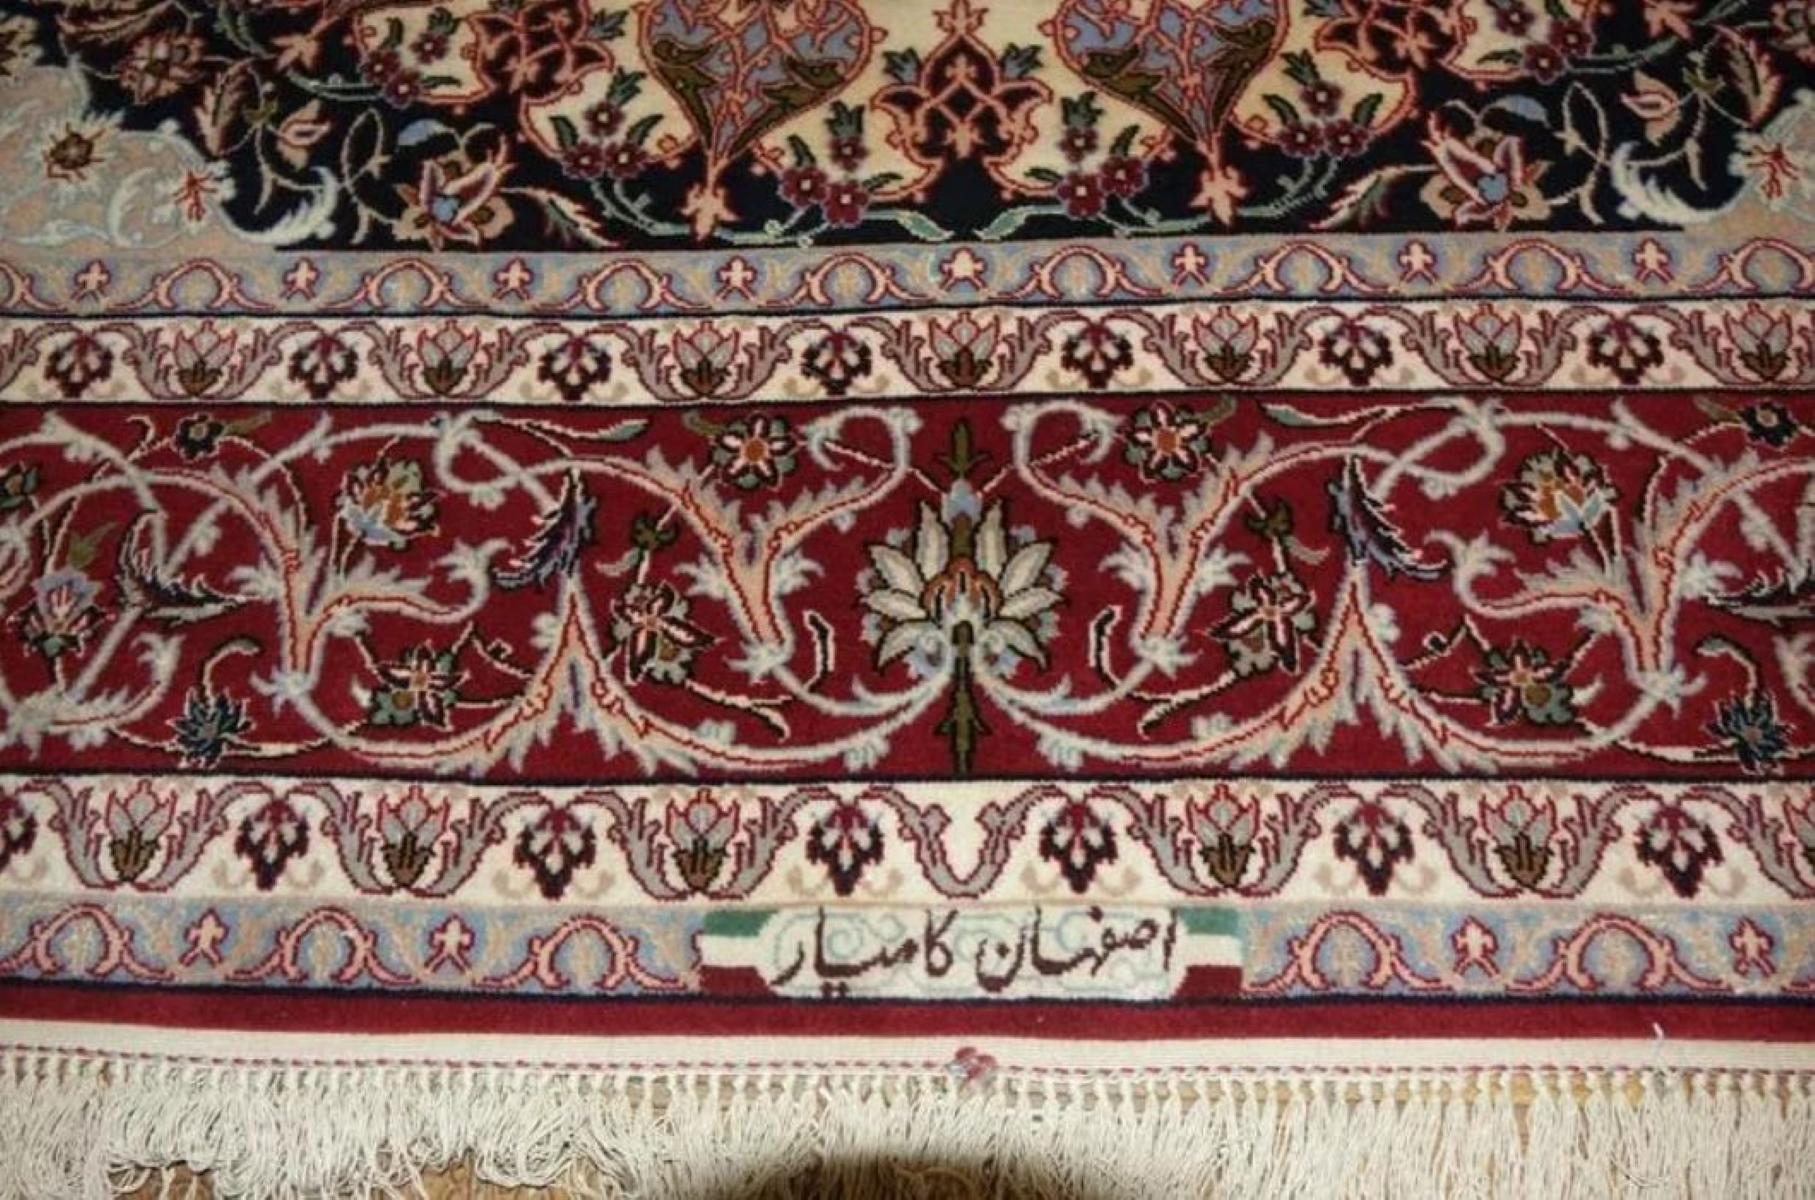 Very fine Persian Silk Ghom - 7.8' x 5.2' In Excellent Condition For Sale In Newmanstown, PA